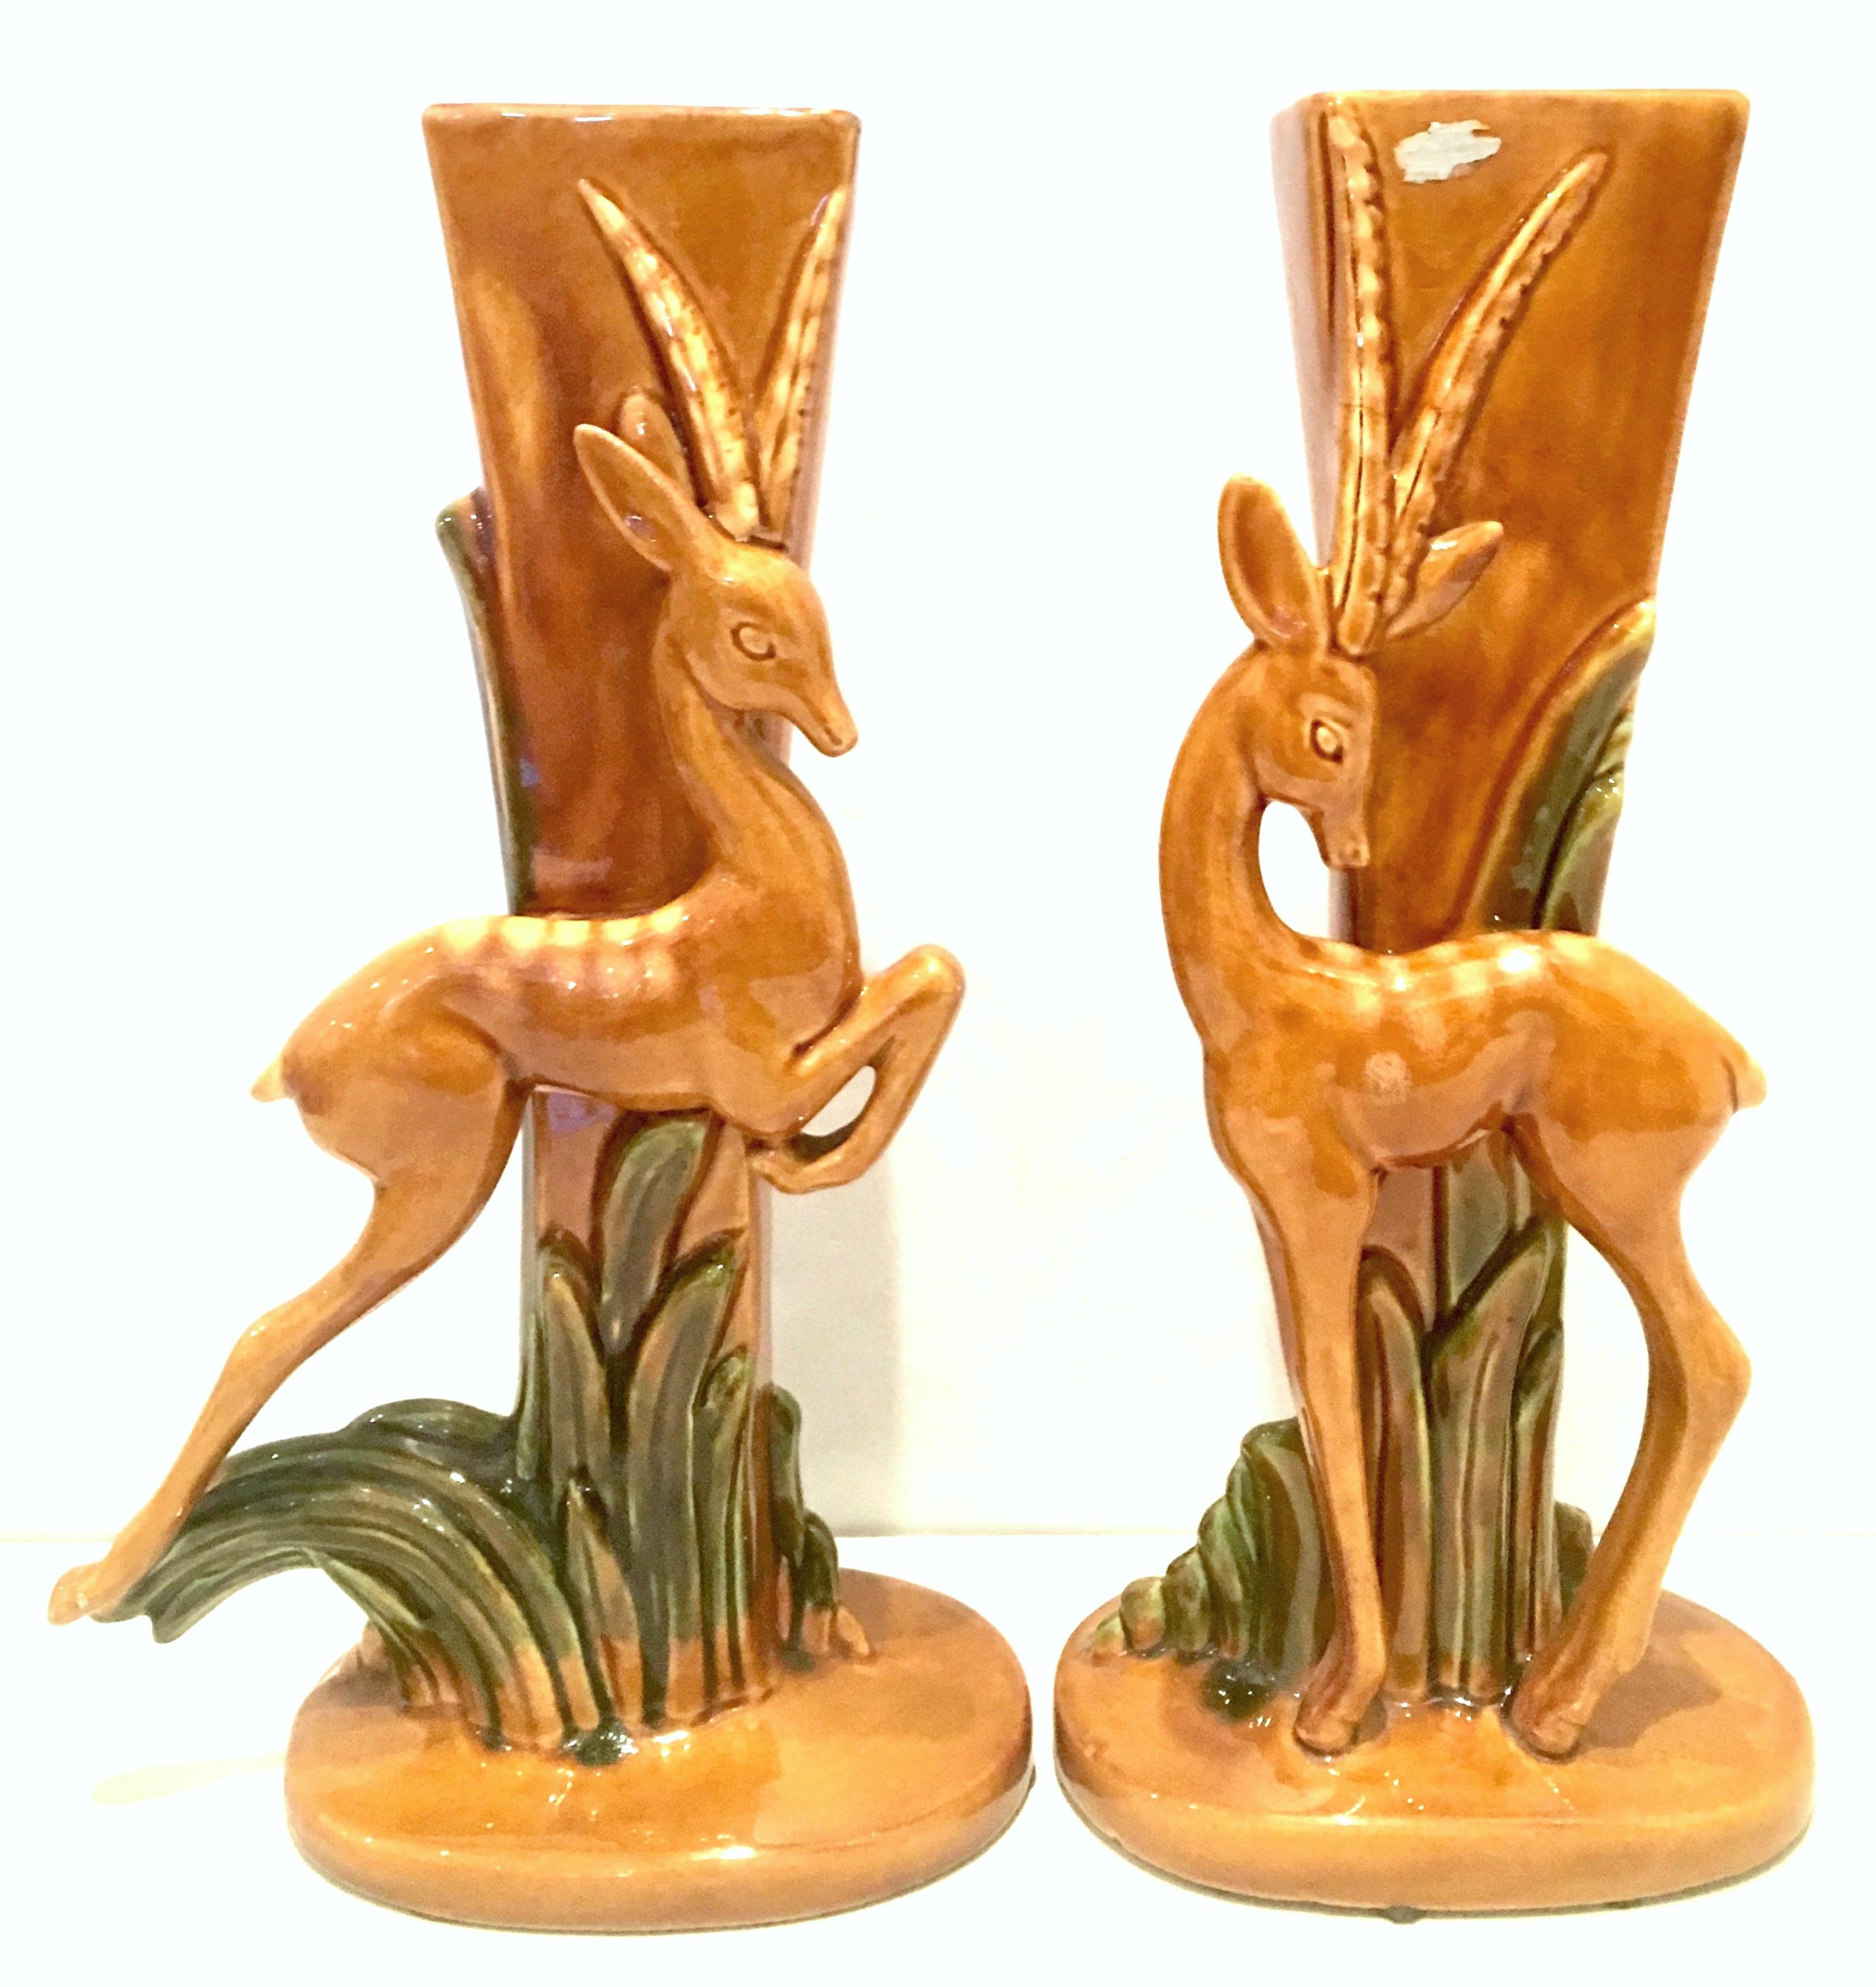 Mid-20th Century pair of Art Deco ceramic glaze Gazelle vases by Royal Haeger. Each handcrafted vase features dimensional, figural and sculptural Gazelles in grass motif. This rare found pair are not identical and have small detail variance, per the